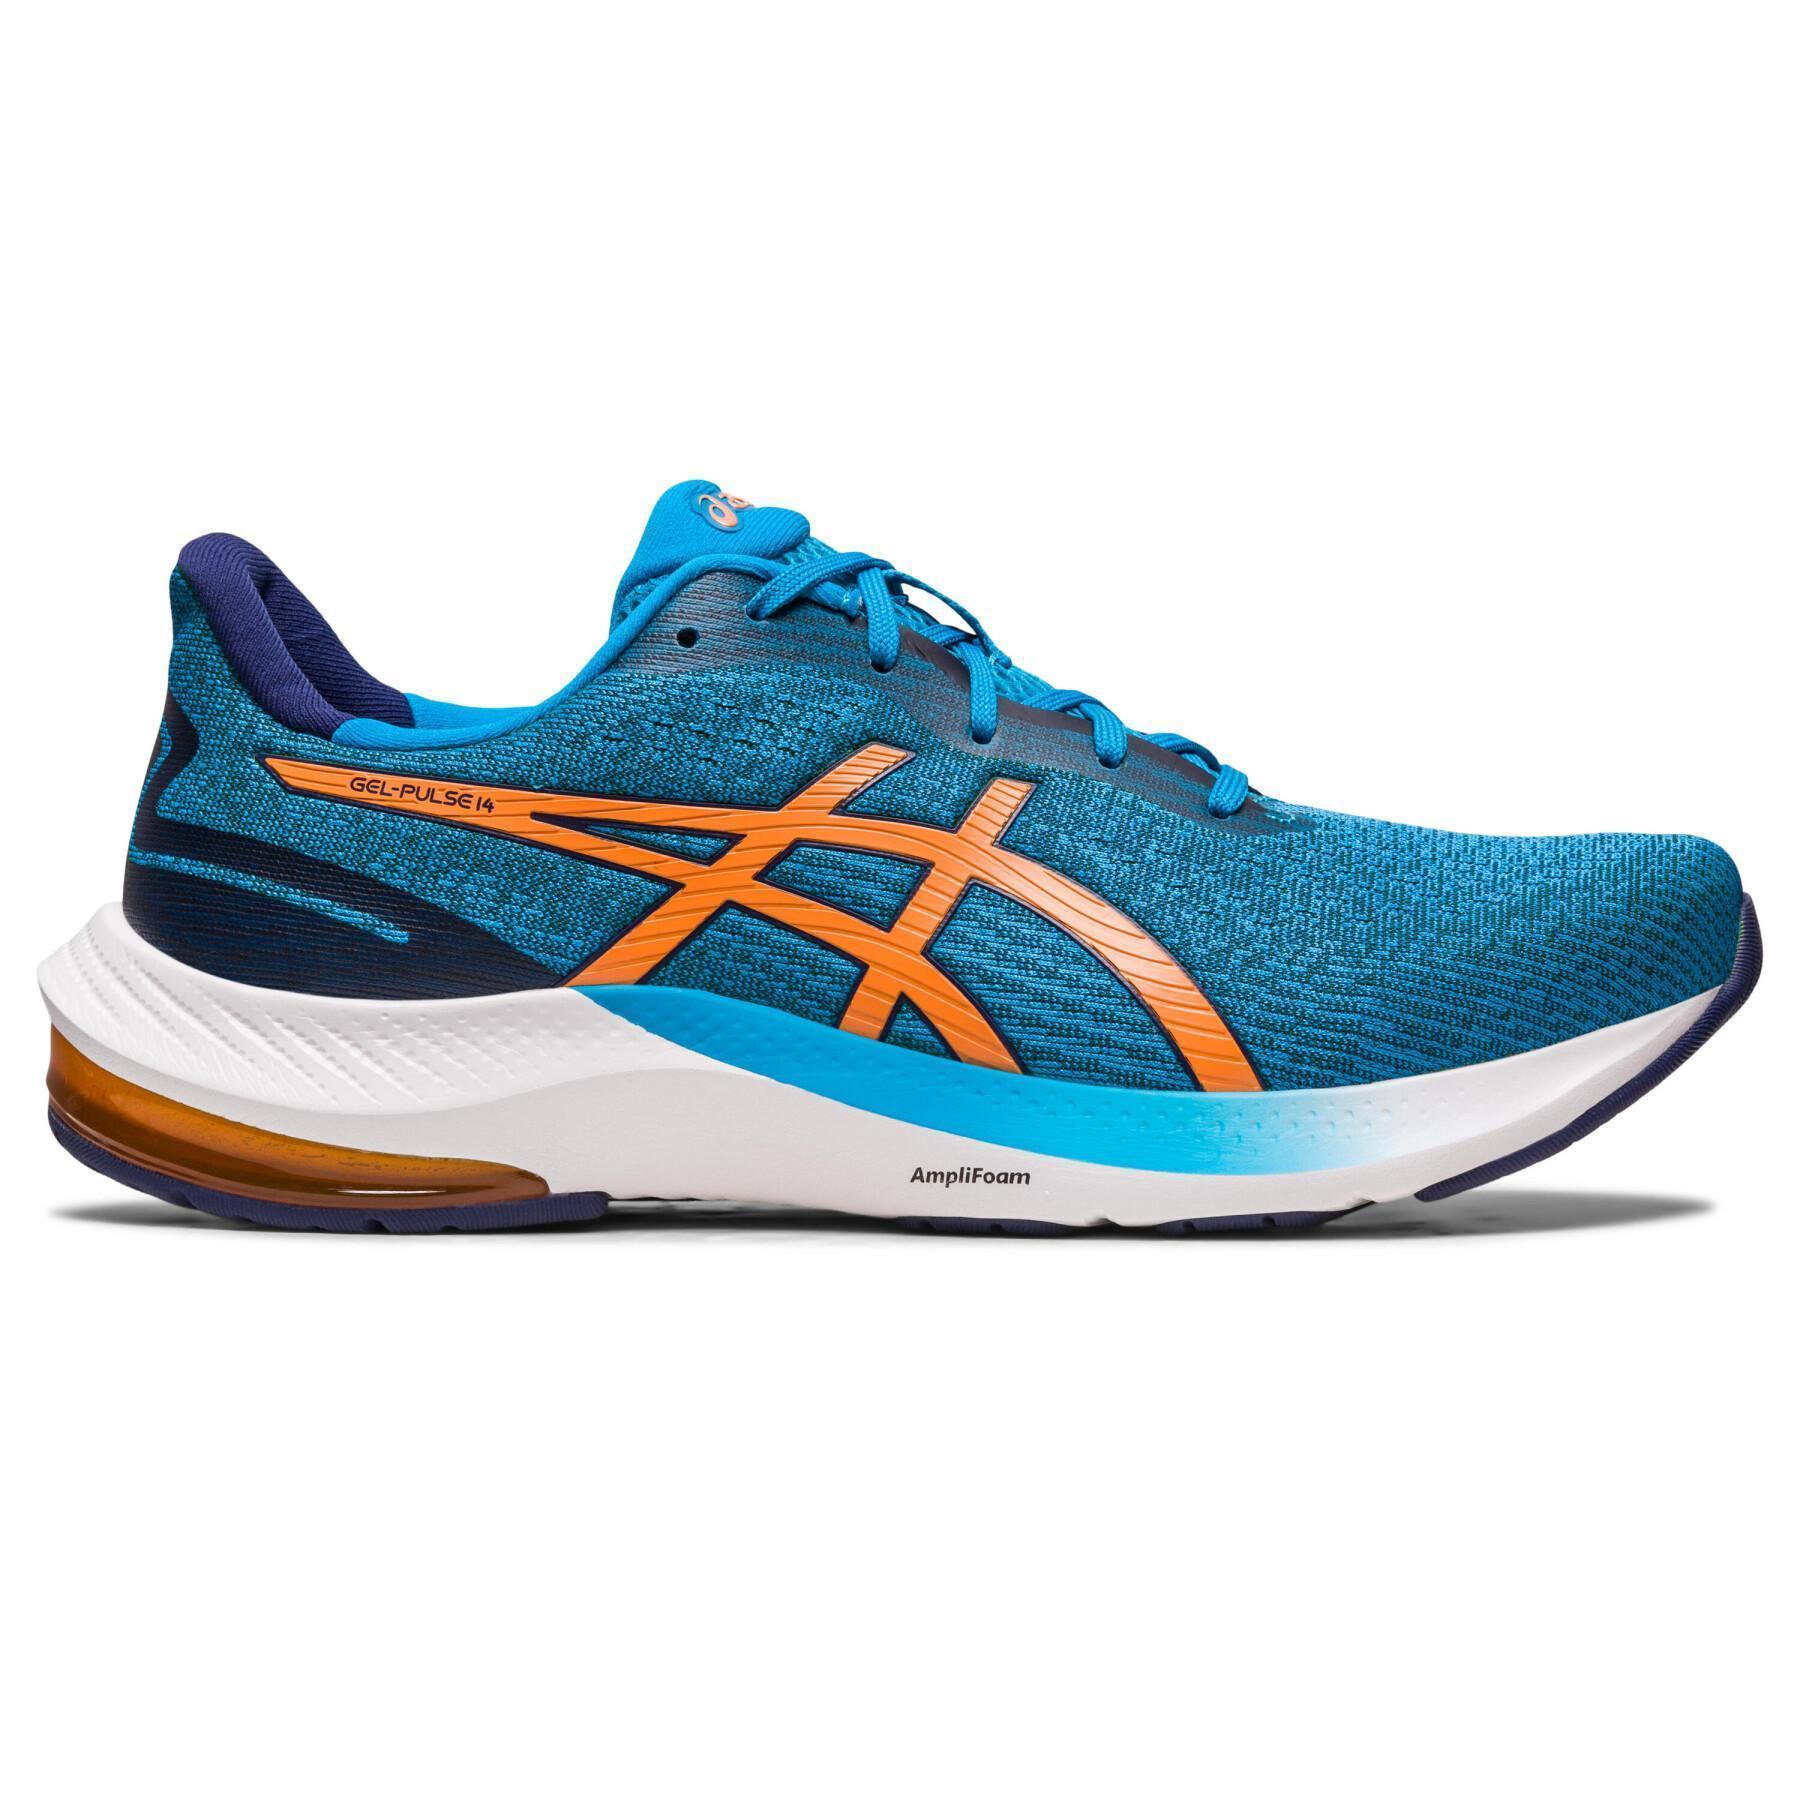 Shoes from running Asics Gel-Pulse 14